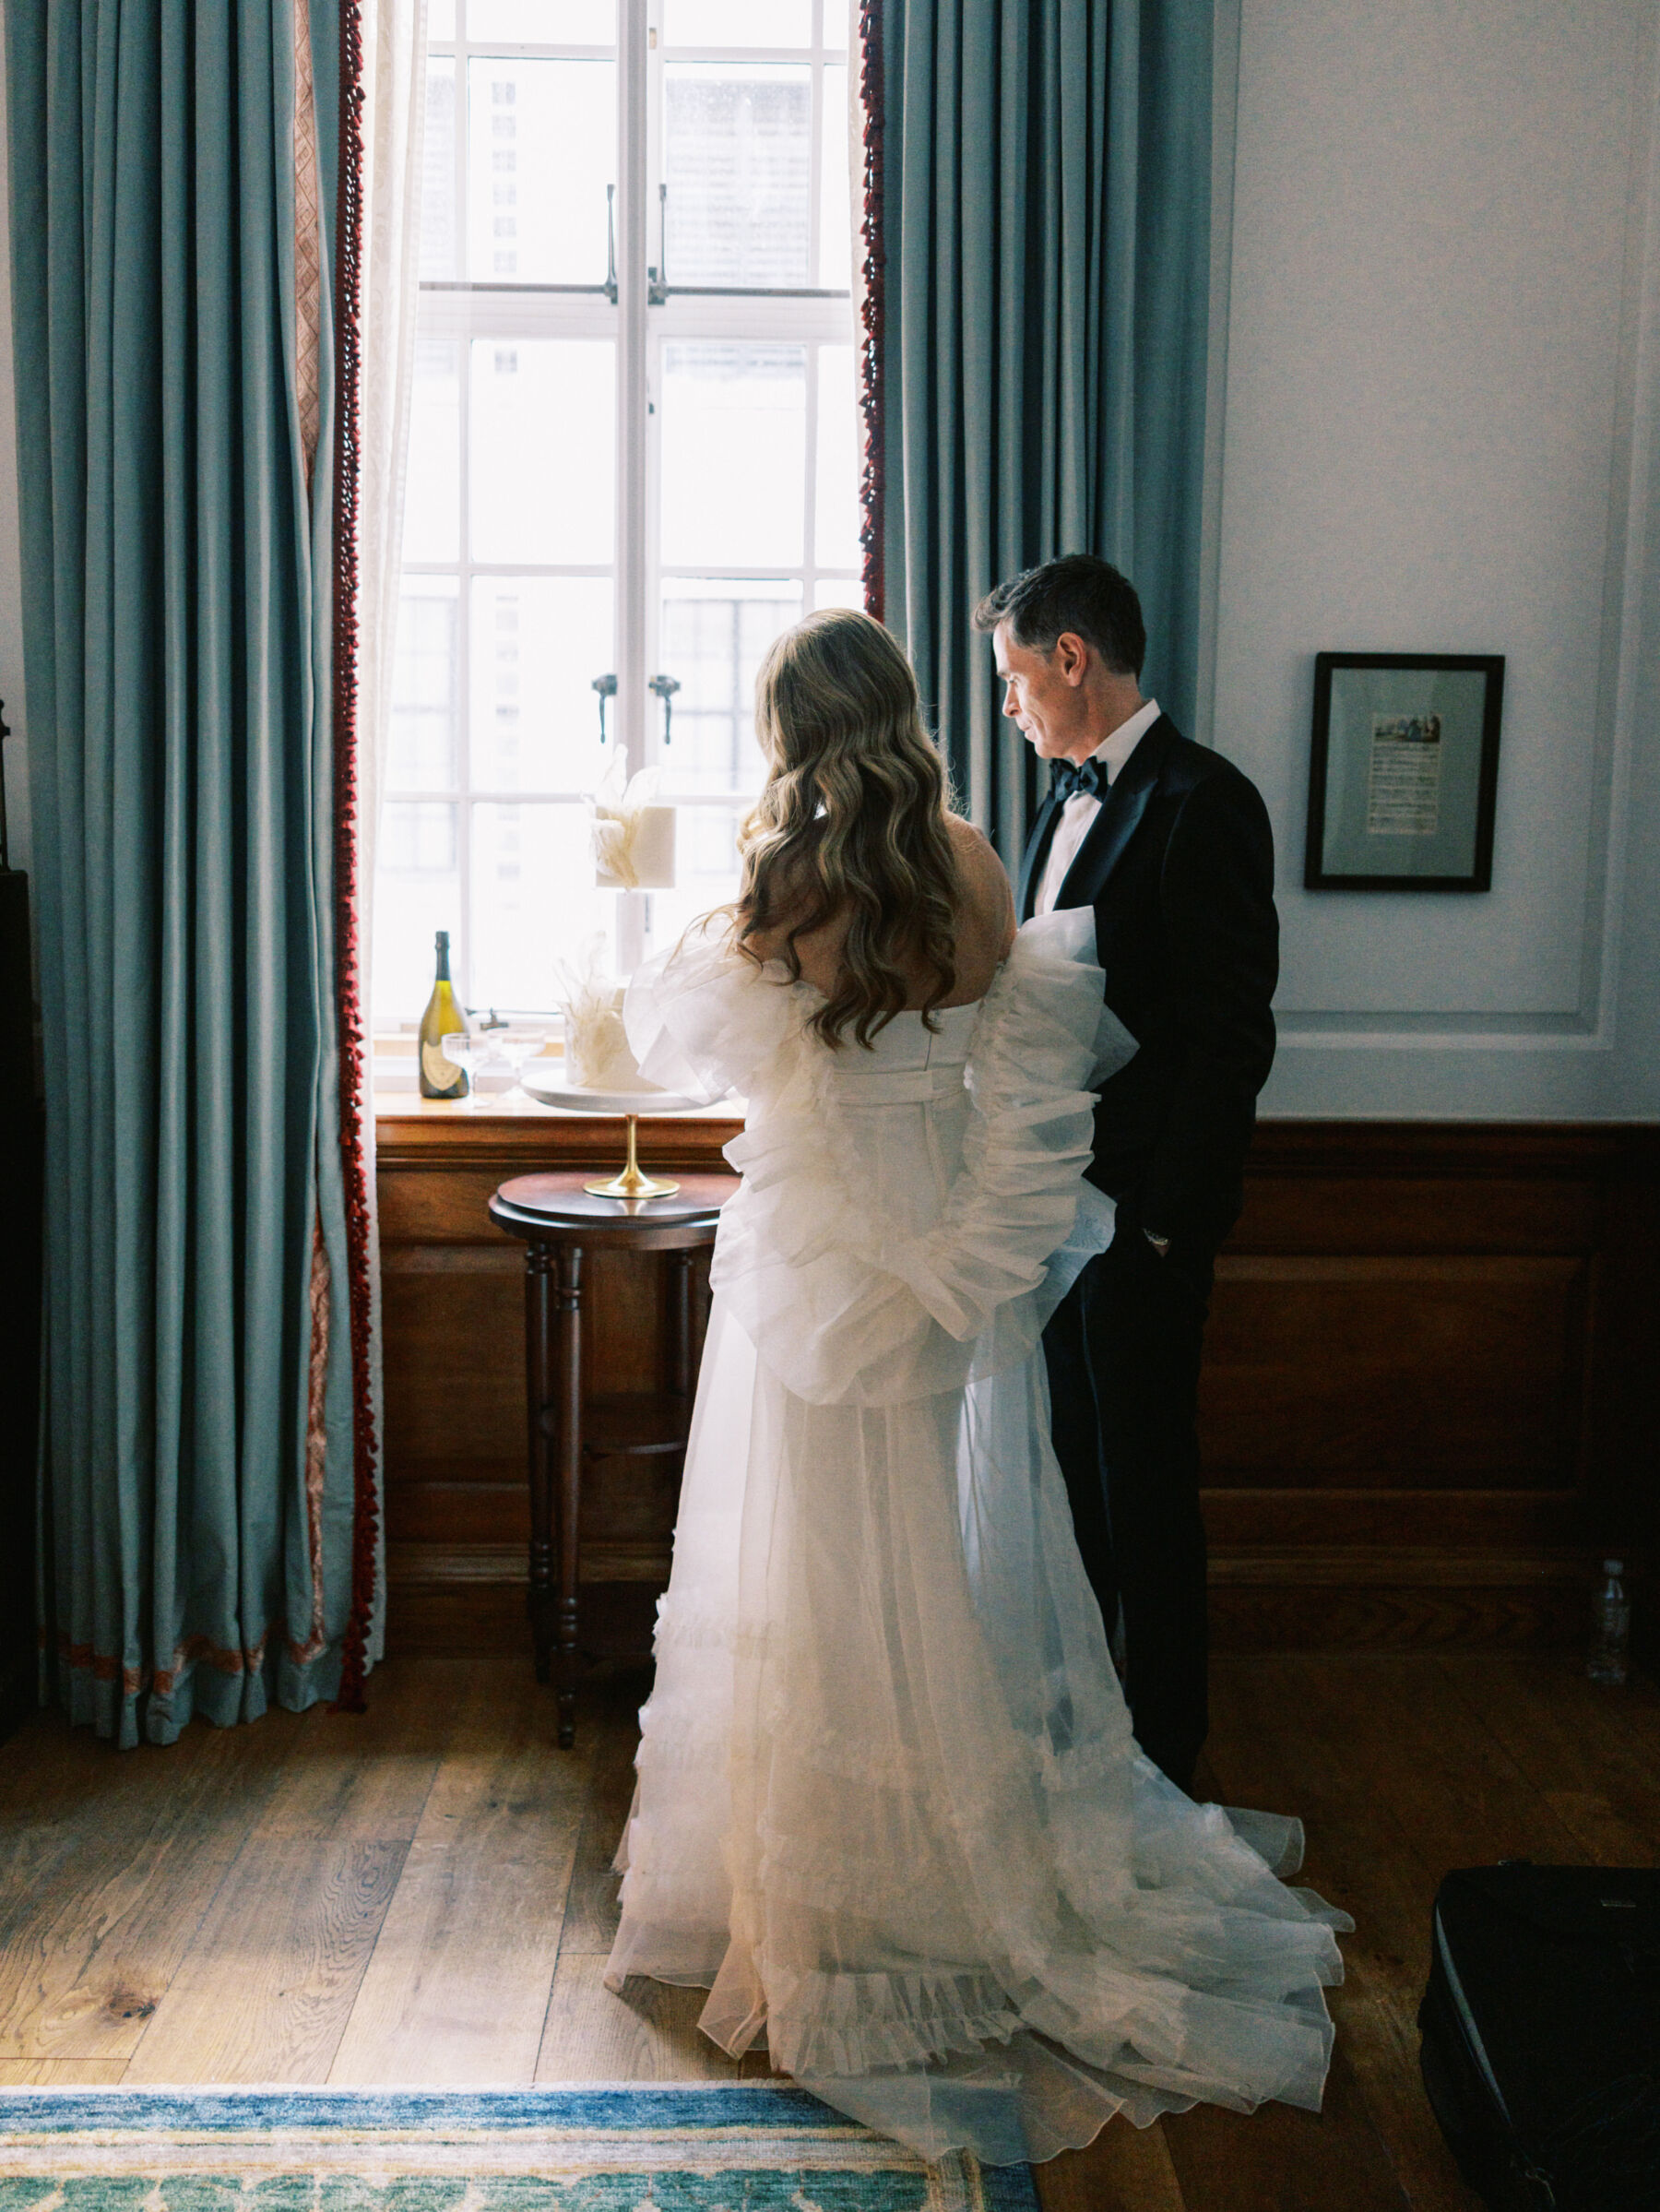 Bride and groom at The Ned, London and drinking champagne. Kernwell Photography.